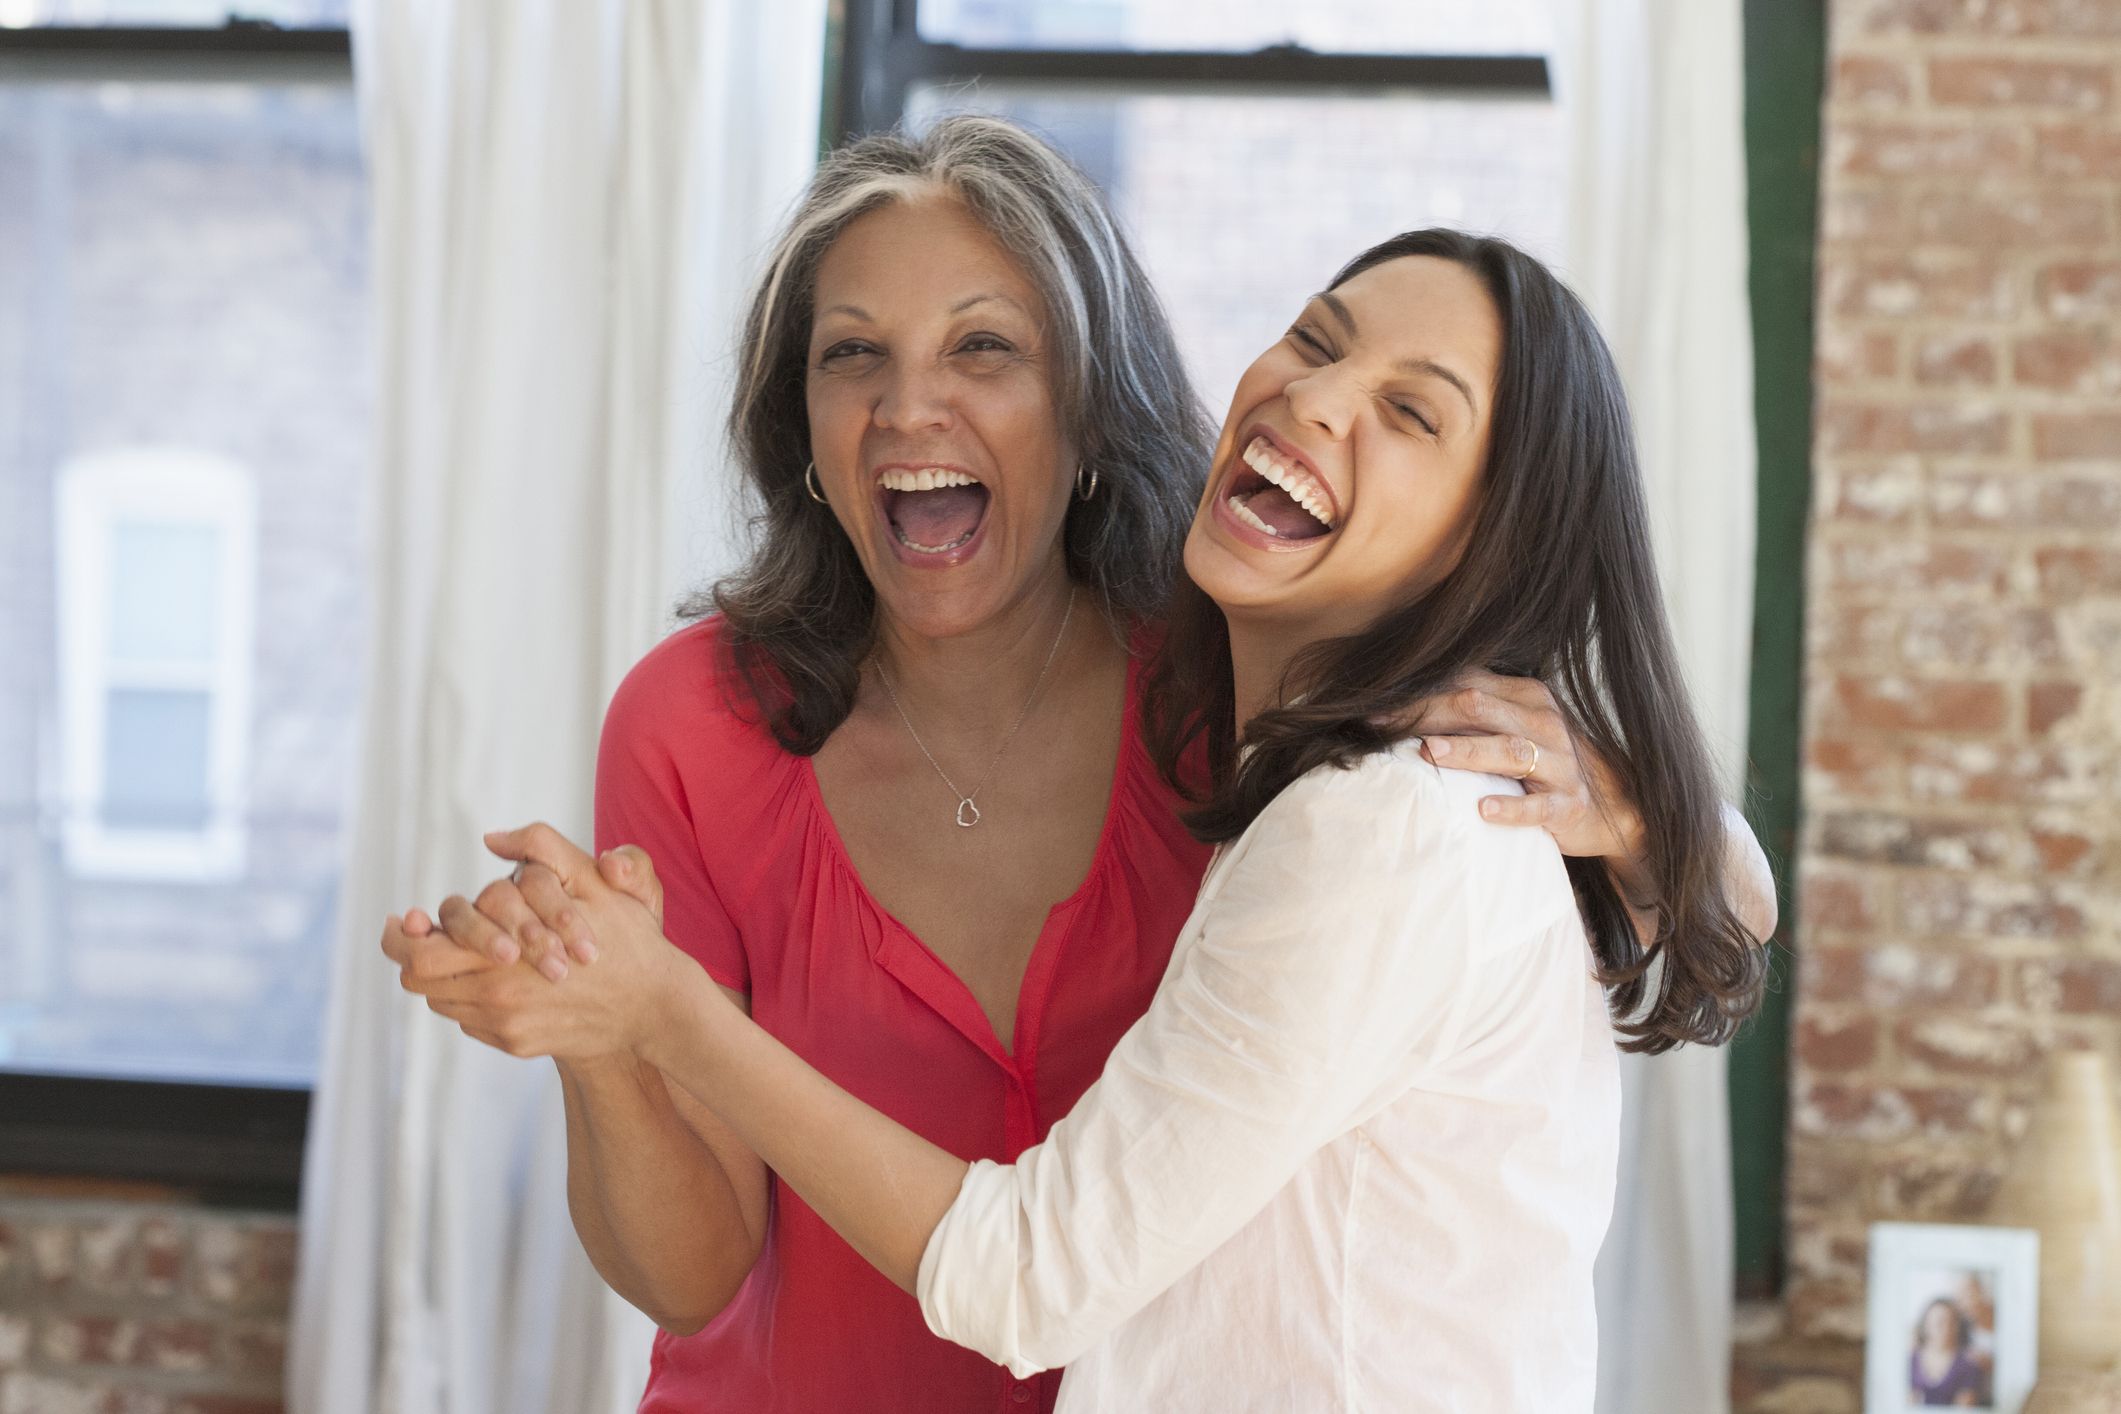 75 Best Mother-Daughter Quotes - Quotes About Moms and Daughters